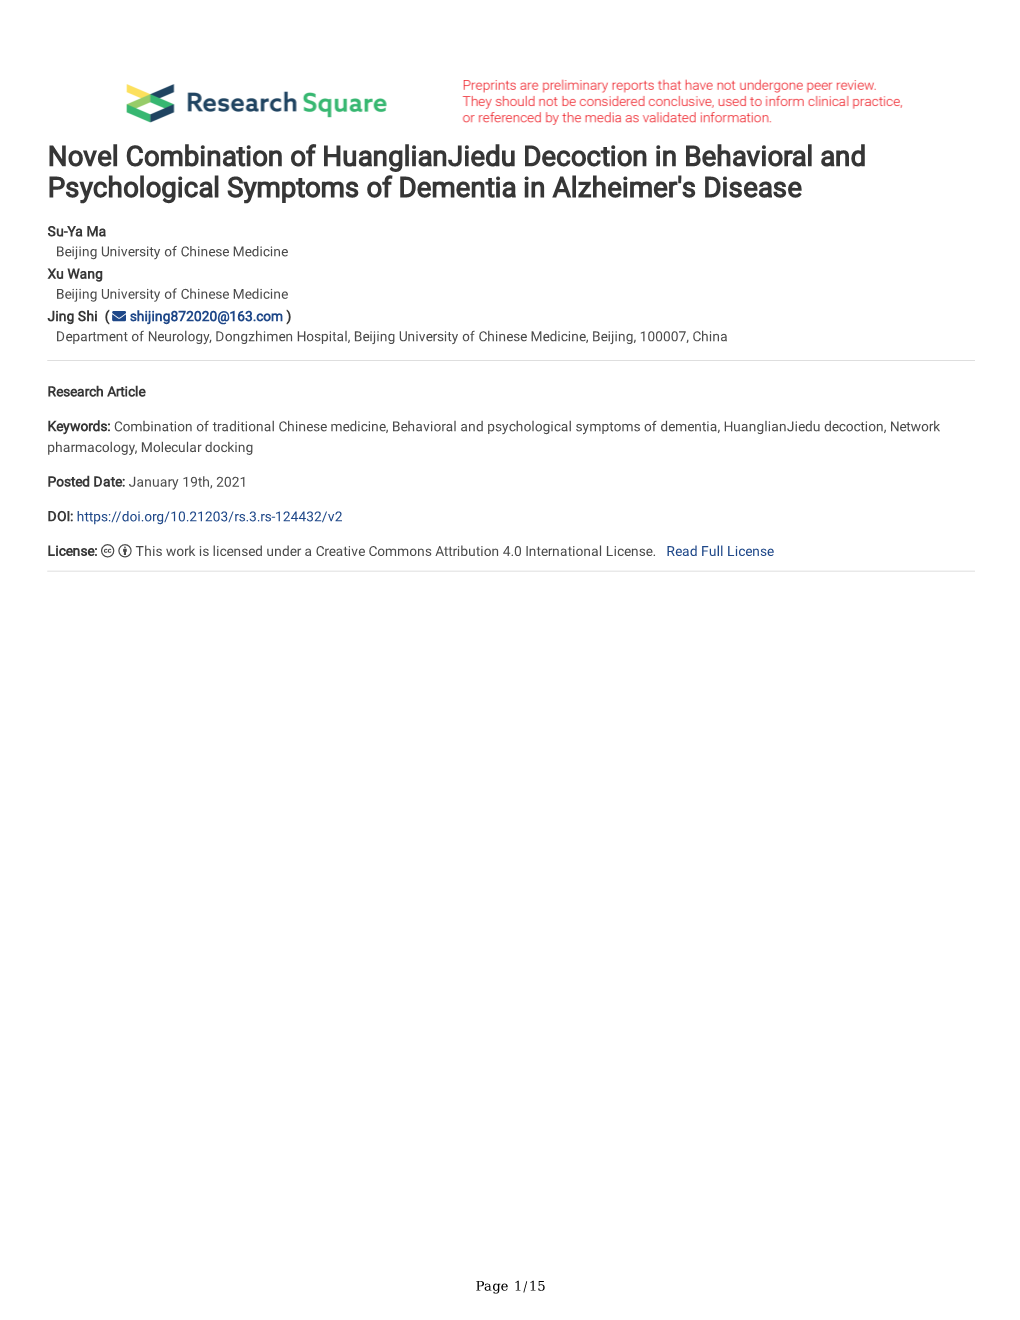 Novel Combination of Huanglianjiedu Decoction in Behavioral and Psychological Symptoms of Dementia in Alzheimer's Disease